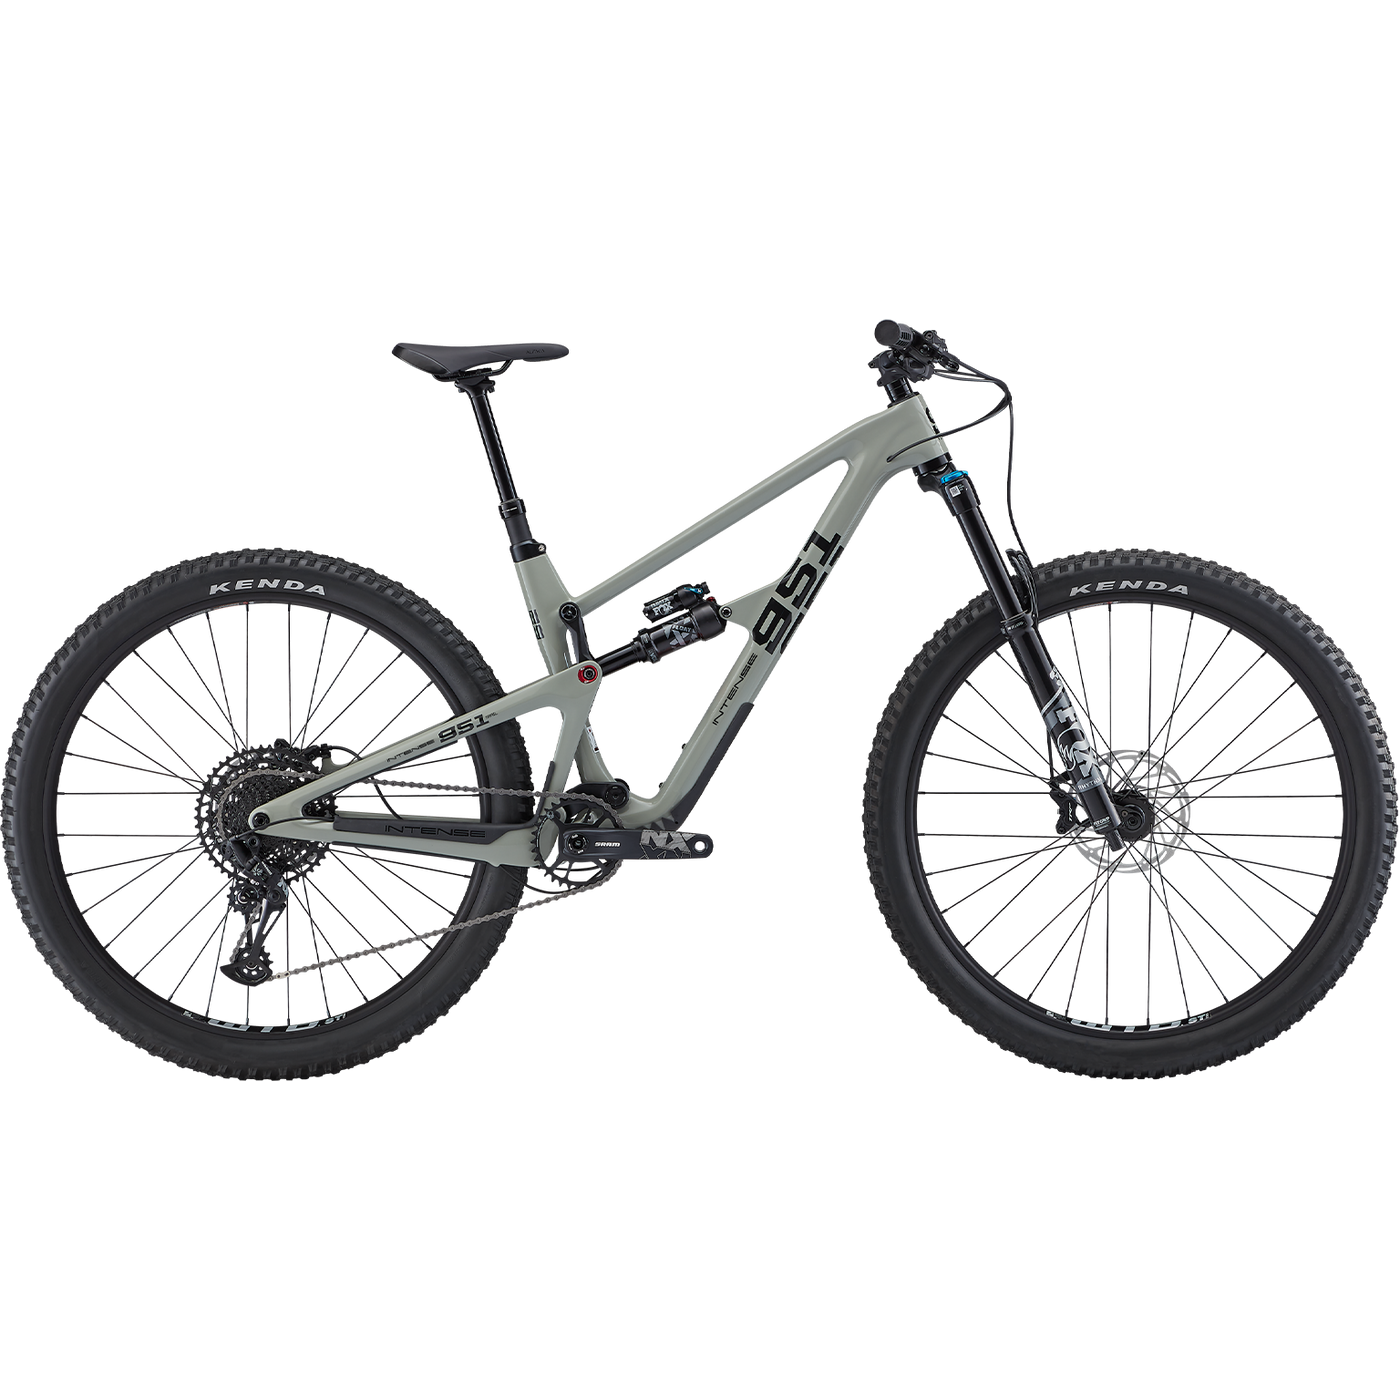 INTENSE CYCLES 951 TRAIL CARBON MOUNTAIN BIKE FOR SALE ONLINE